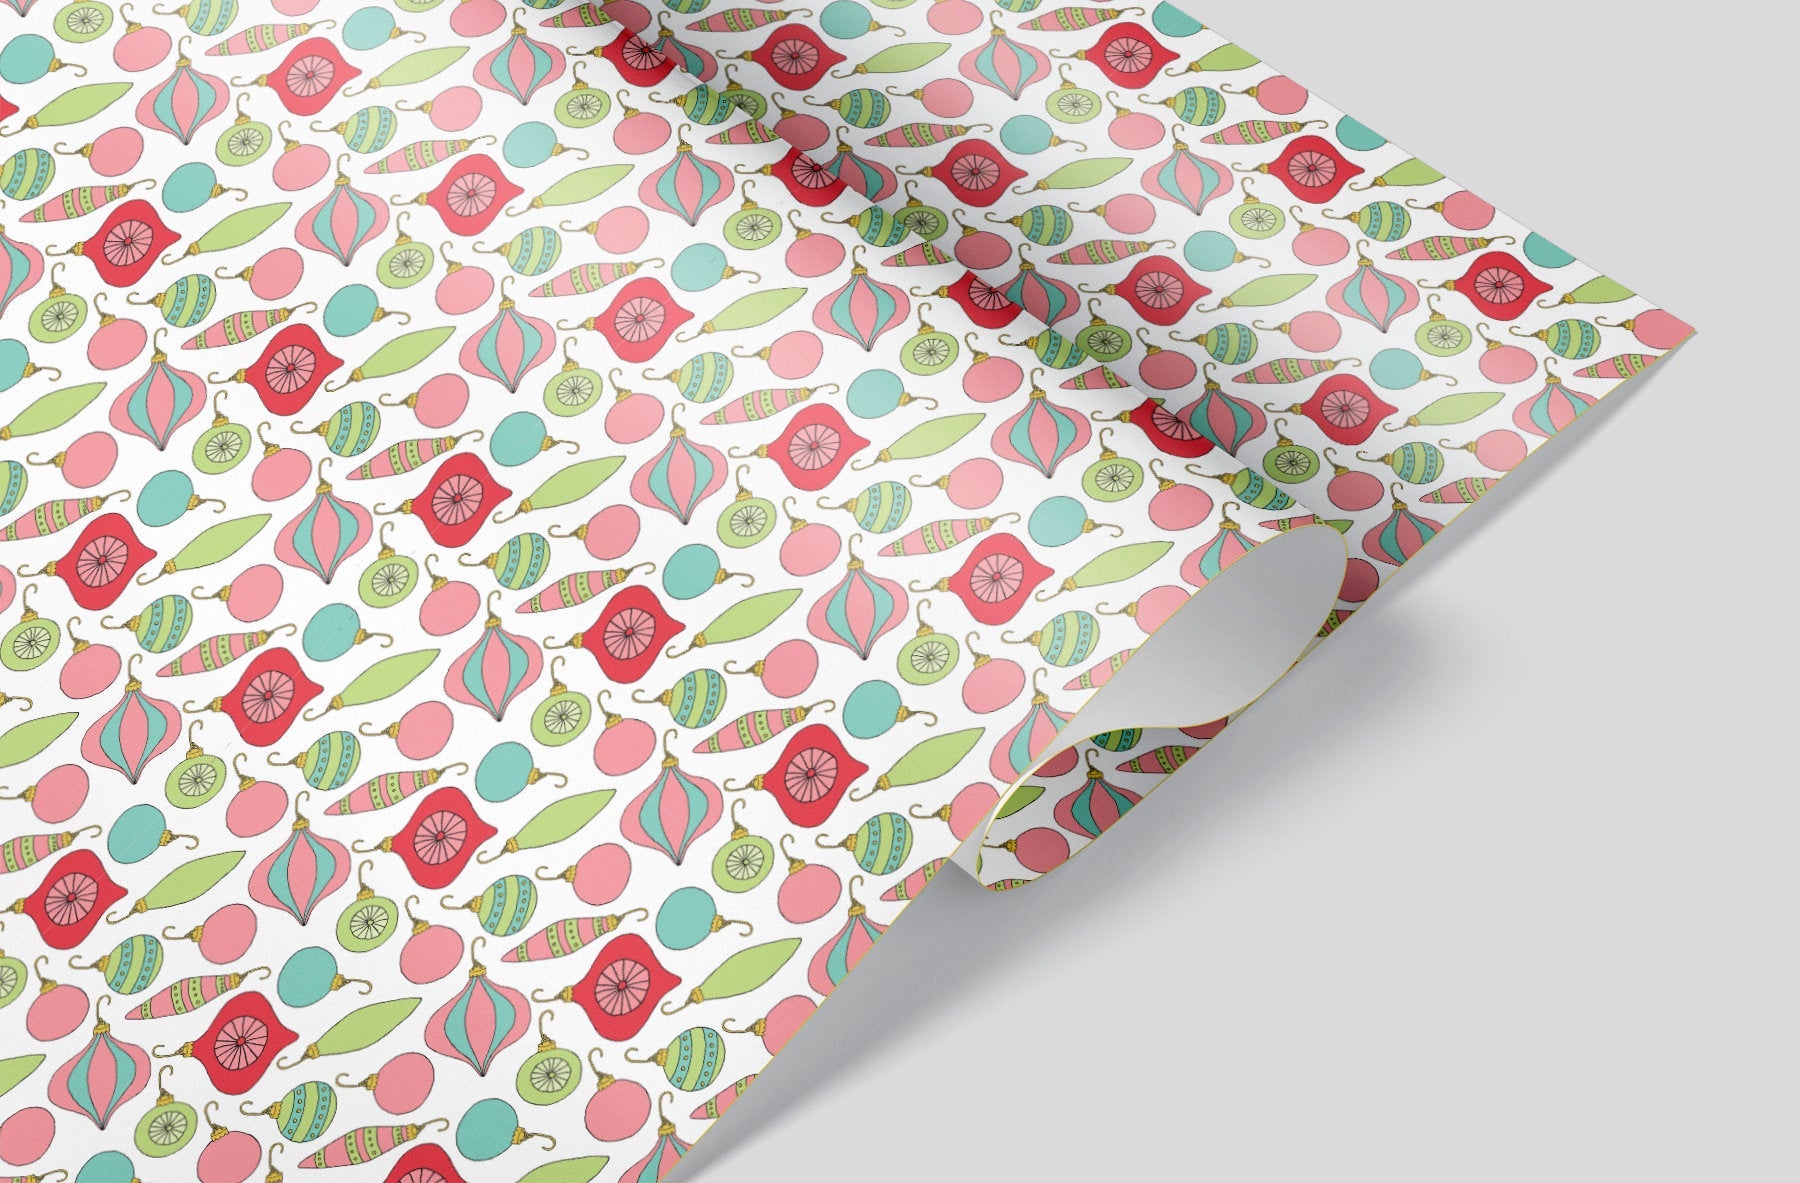 Whoville Style Christmas Ornaments diagonally printed on a white sheet of wrapping paper 